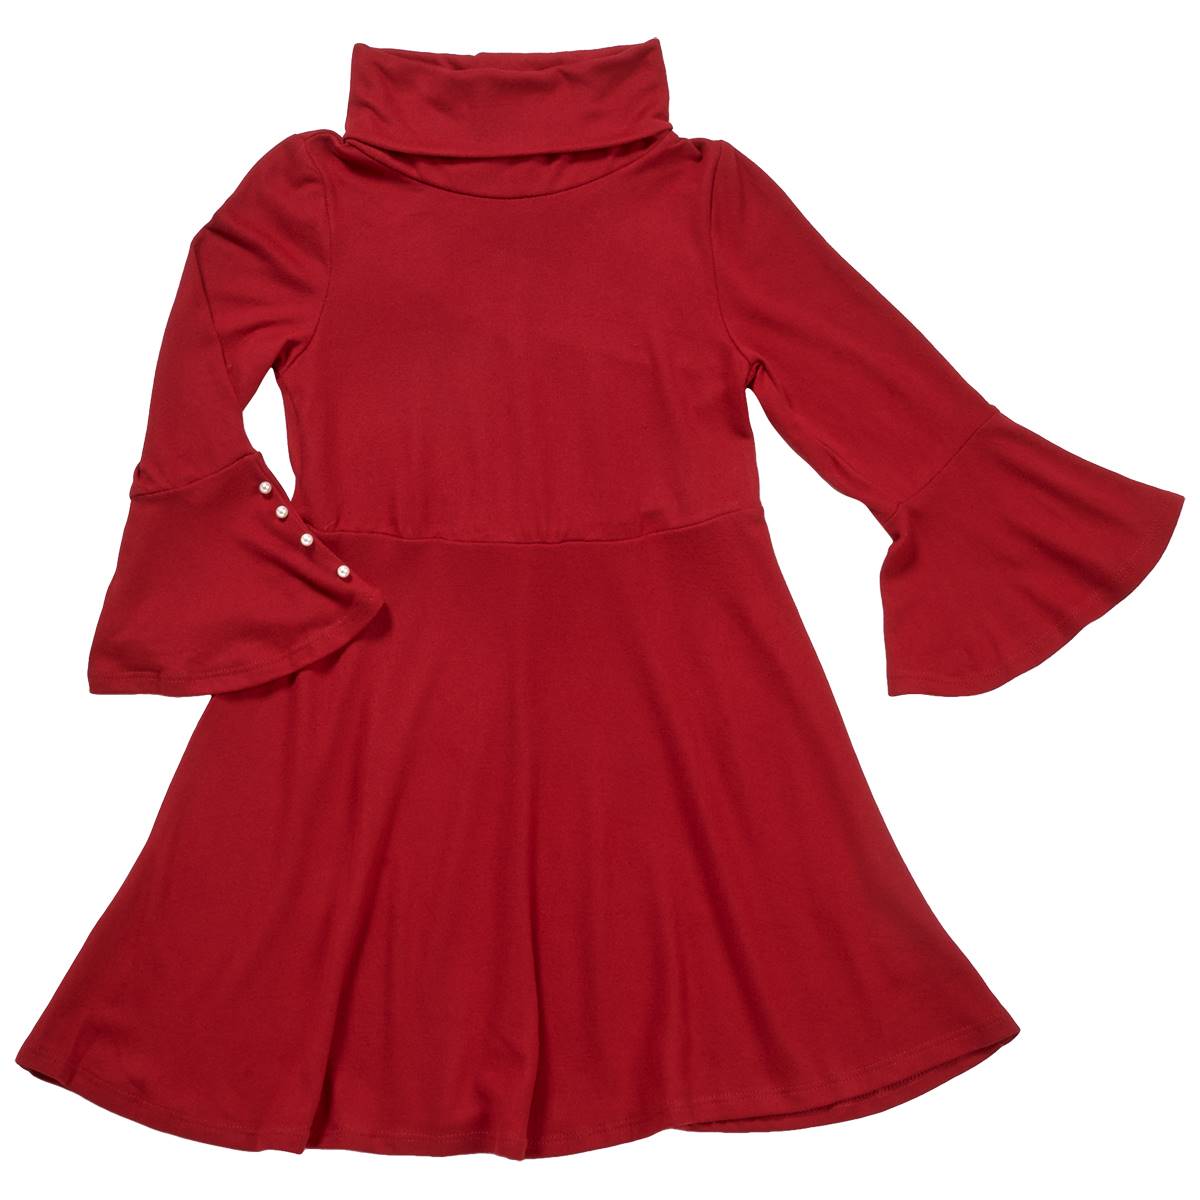 Girls (7-16) Poppies & Roses Bell Sleeve Sweater Dress W/Pearls